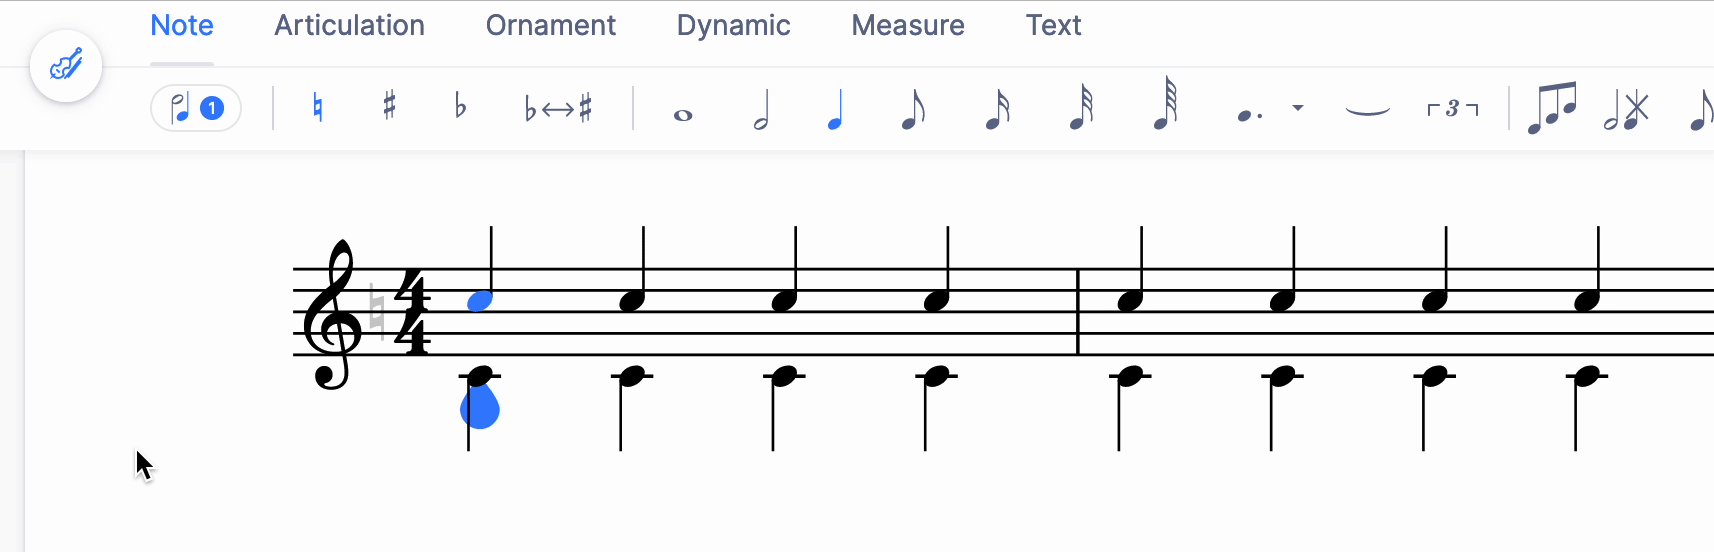 Swap voices assigned to notes